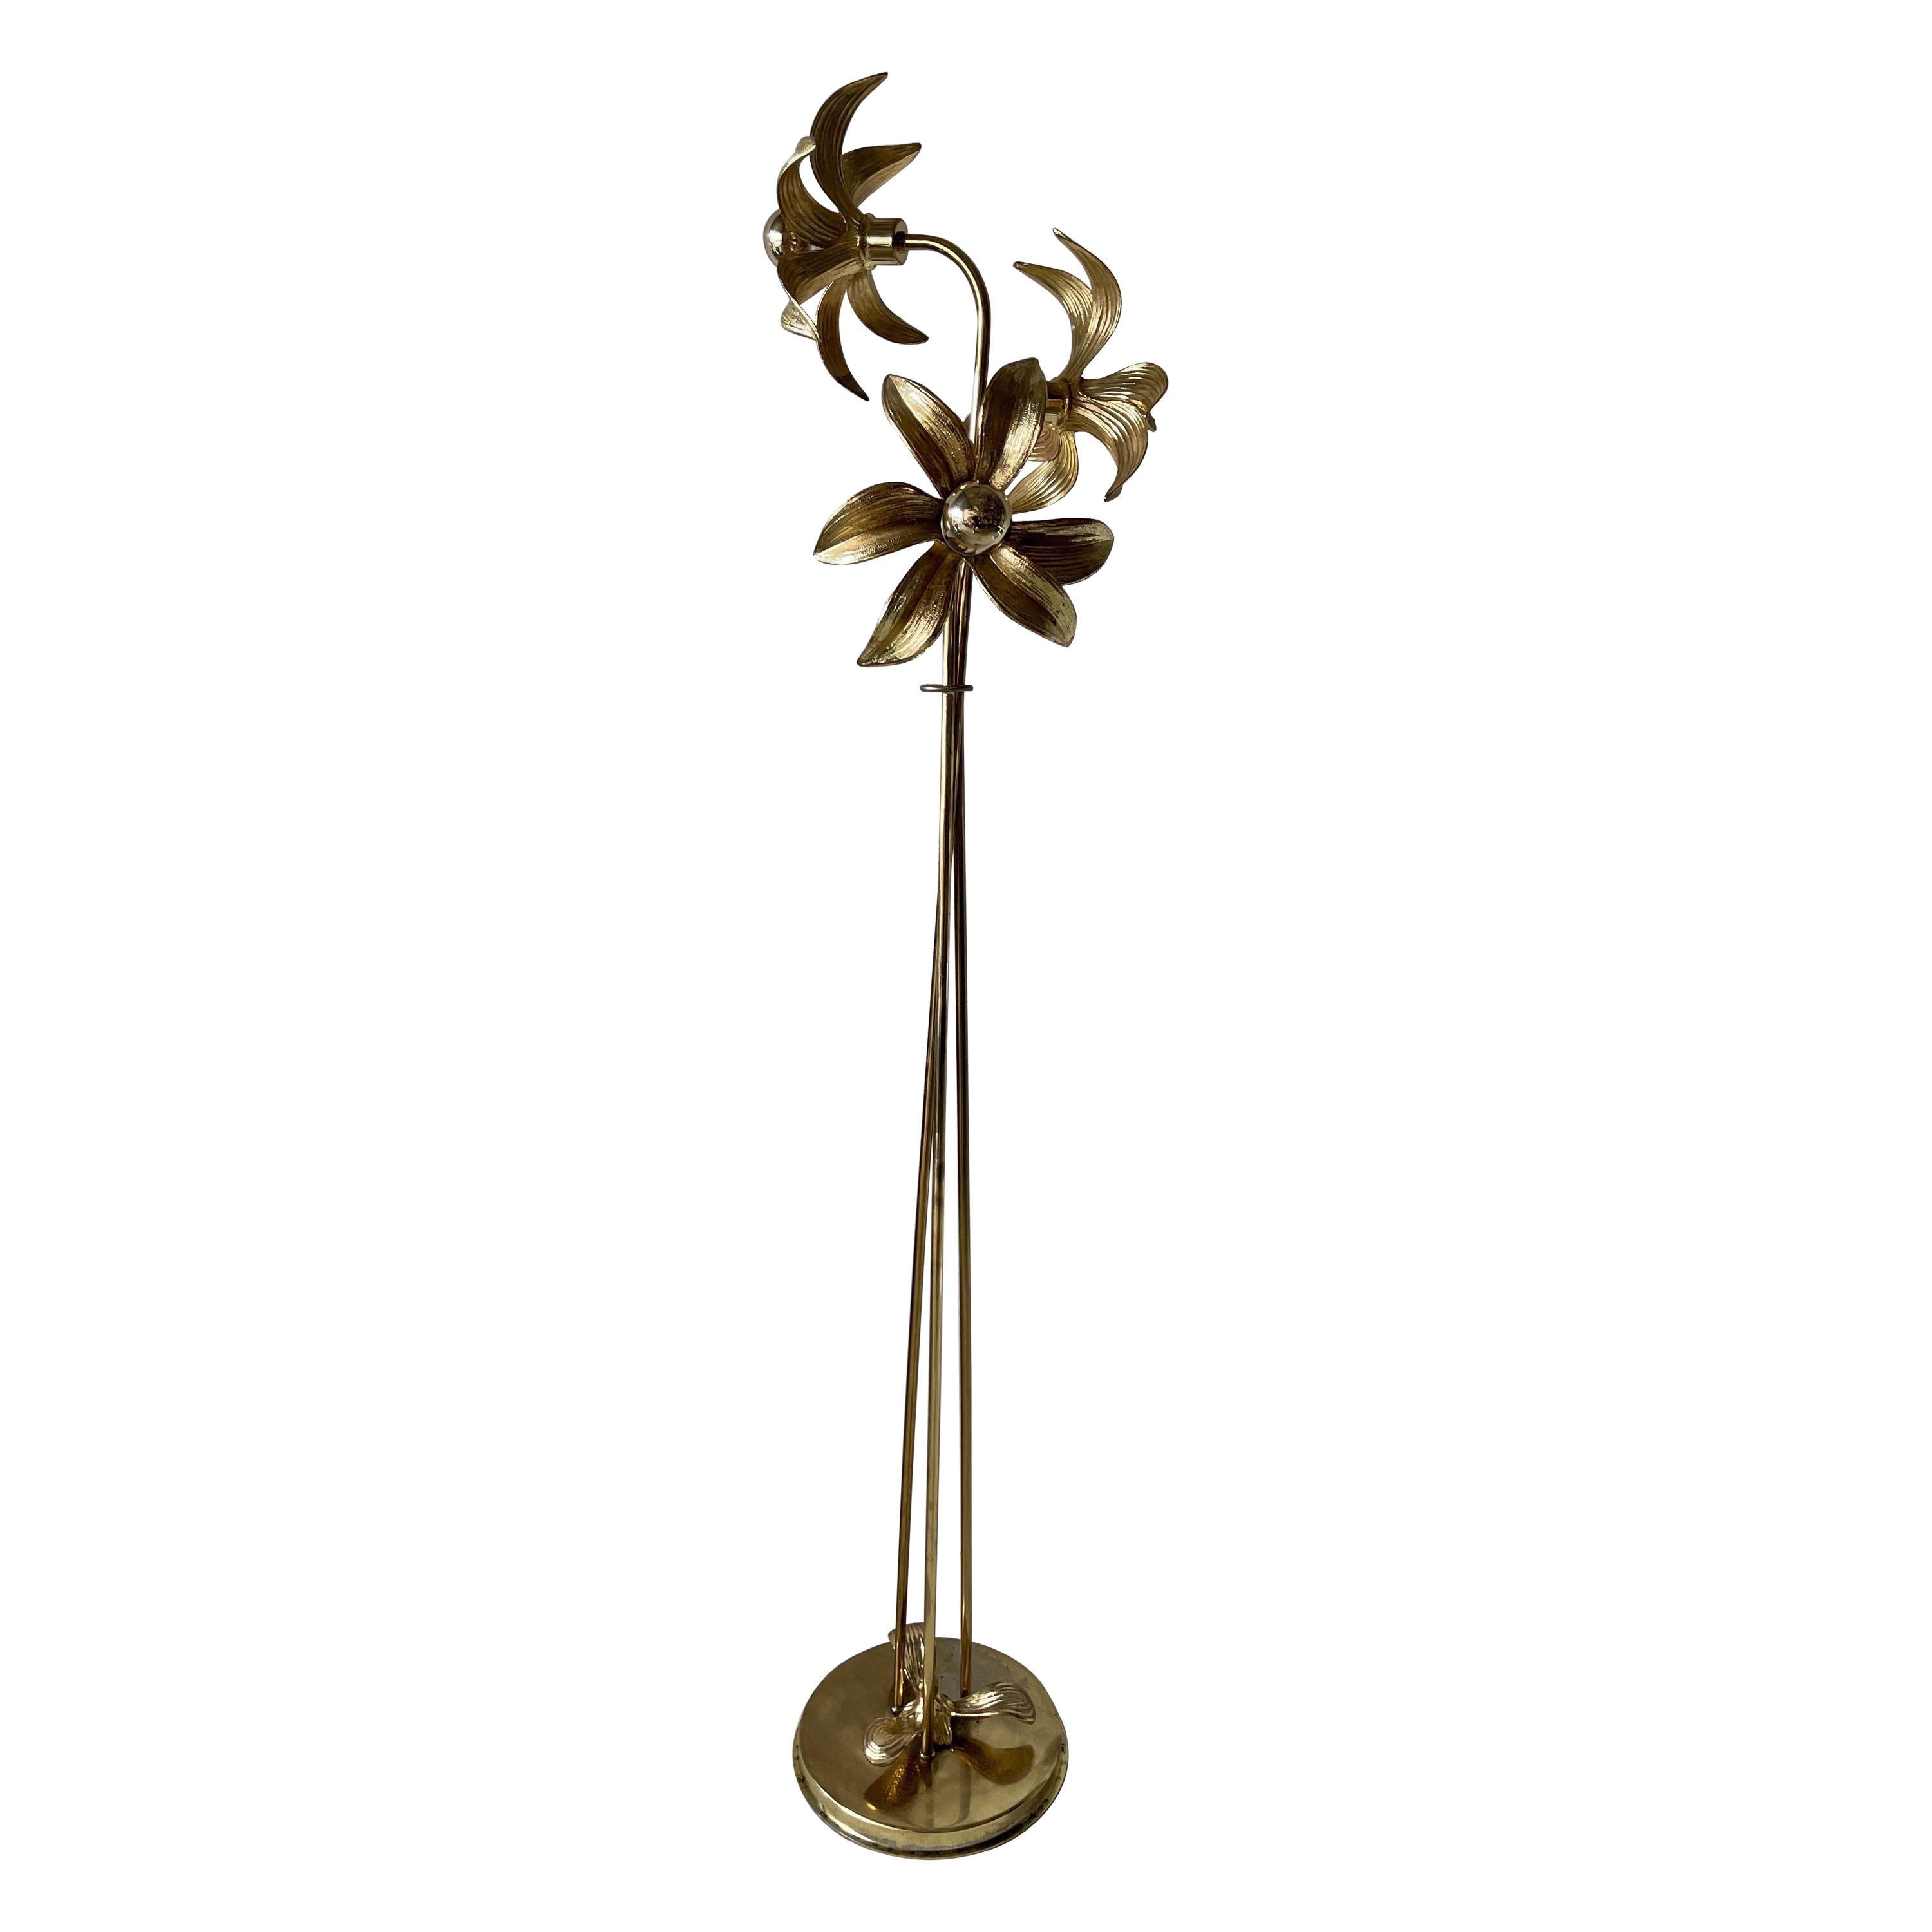 Triple Flower Shade Brass Floor Lamp by Willy Daro for Massive, 1970s, Germany For Sale